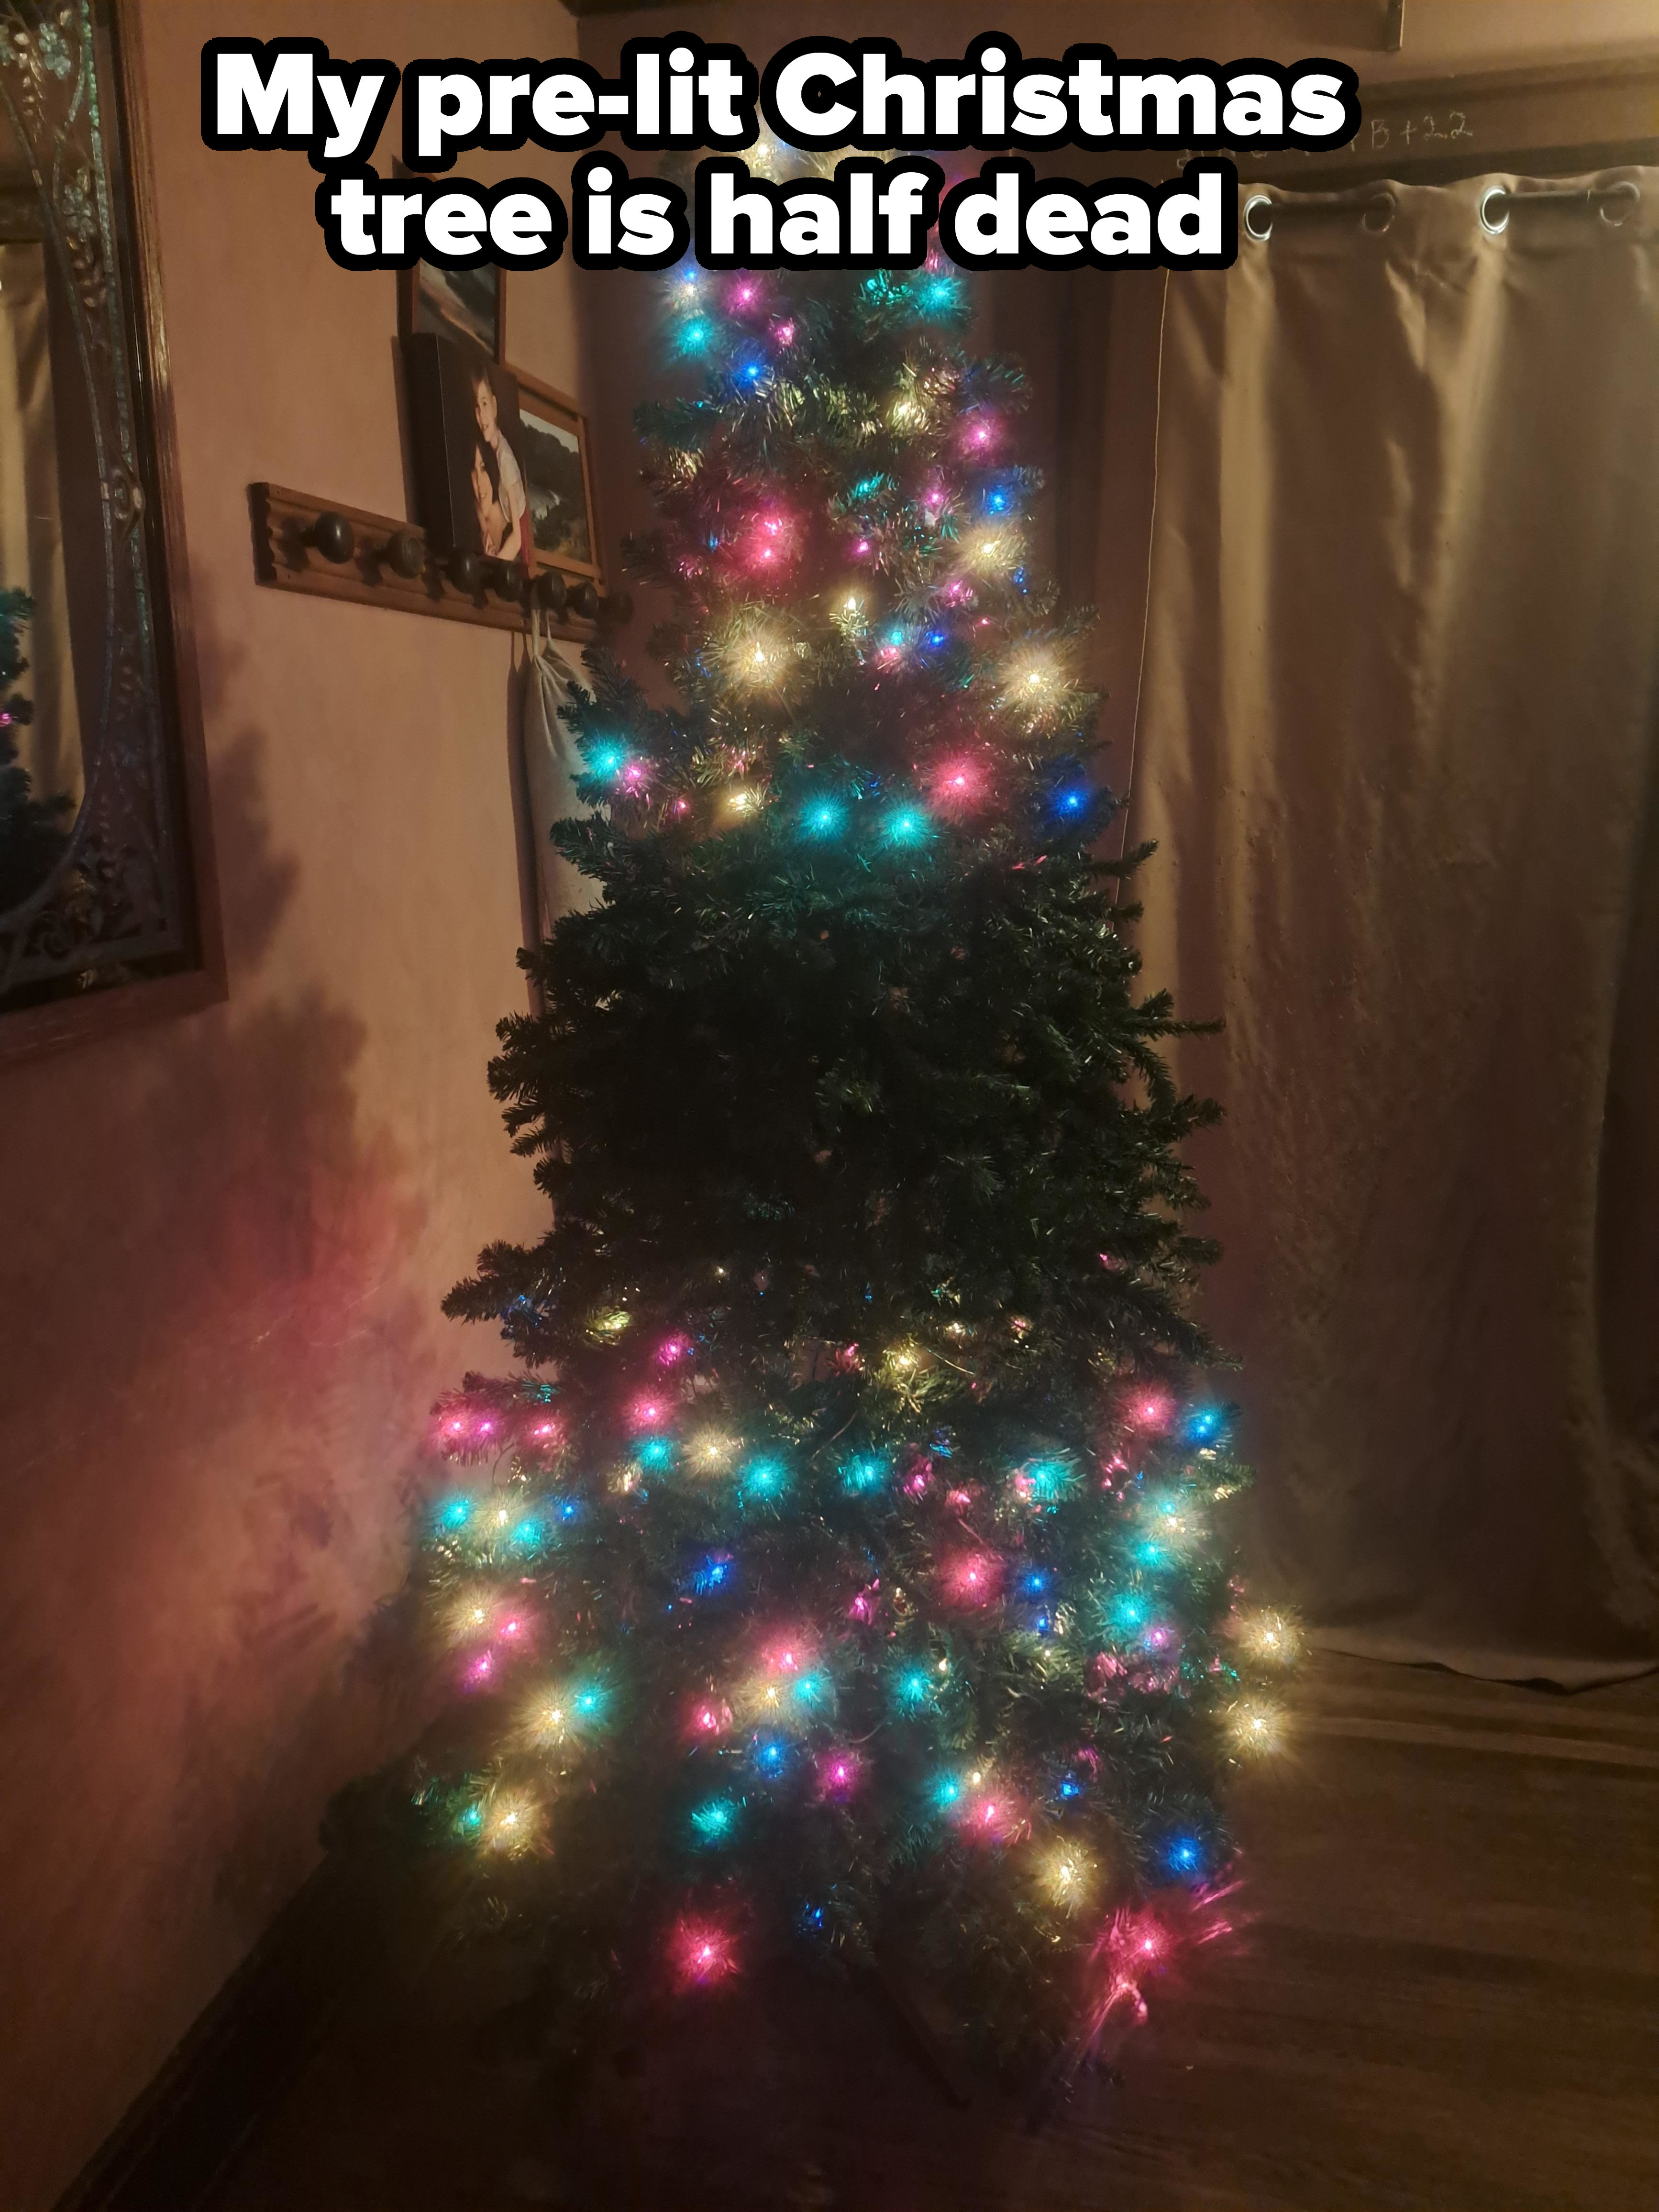 a Christmas tree with half the lights out